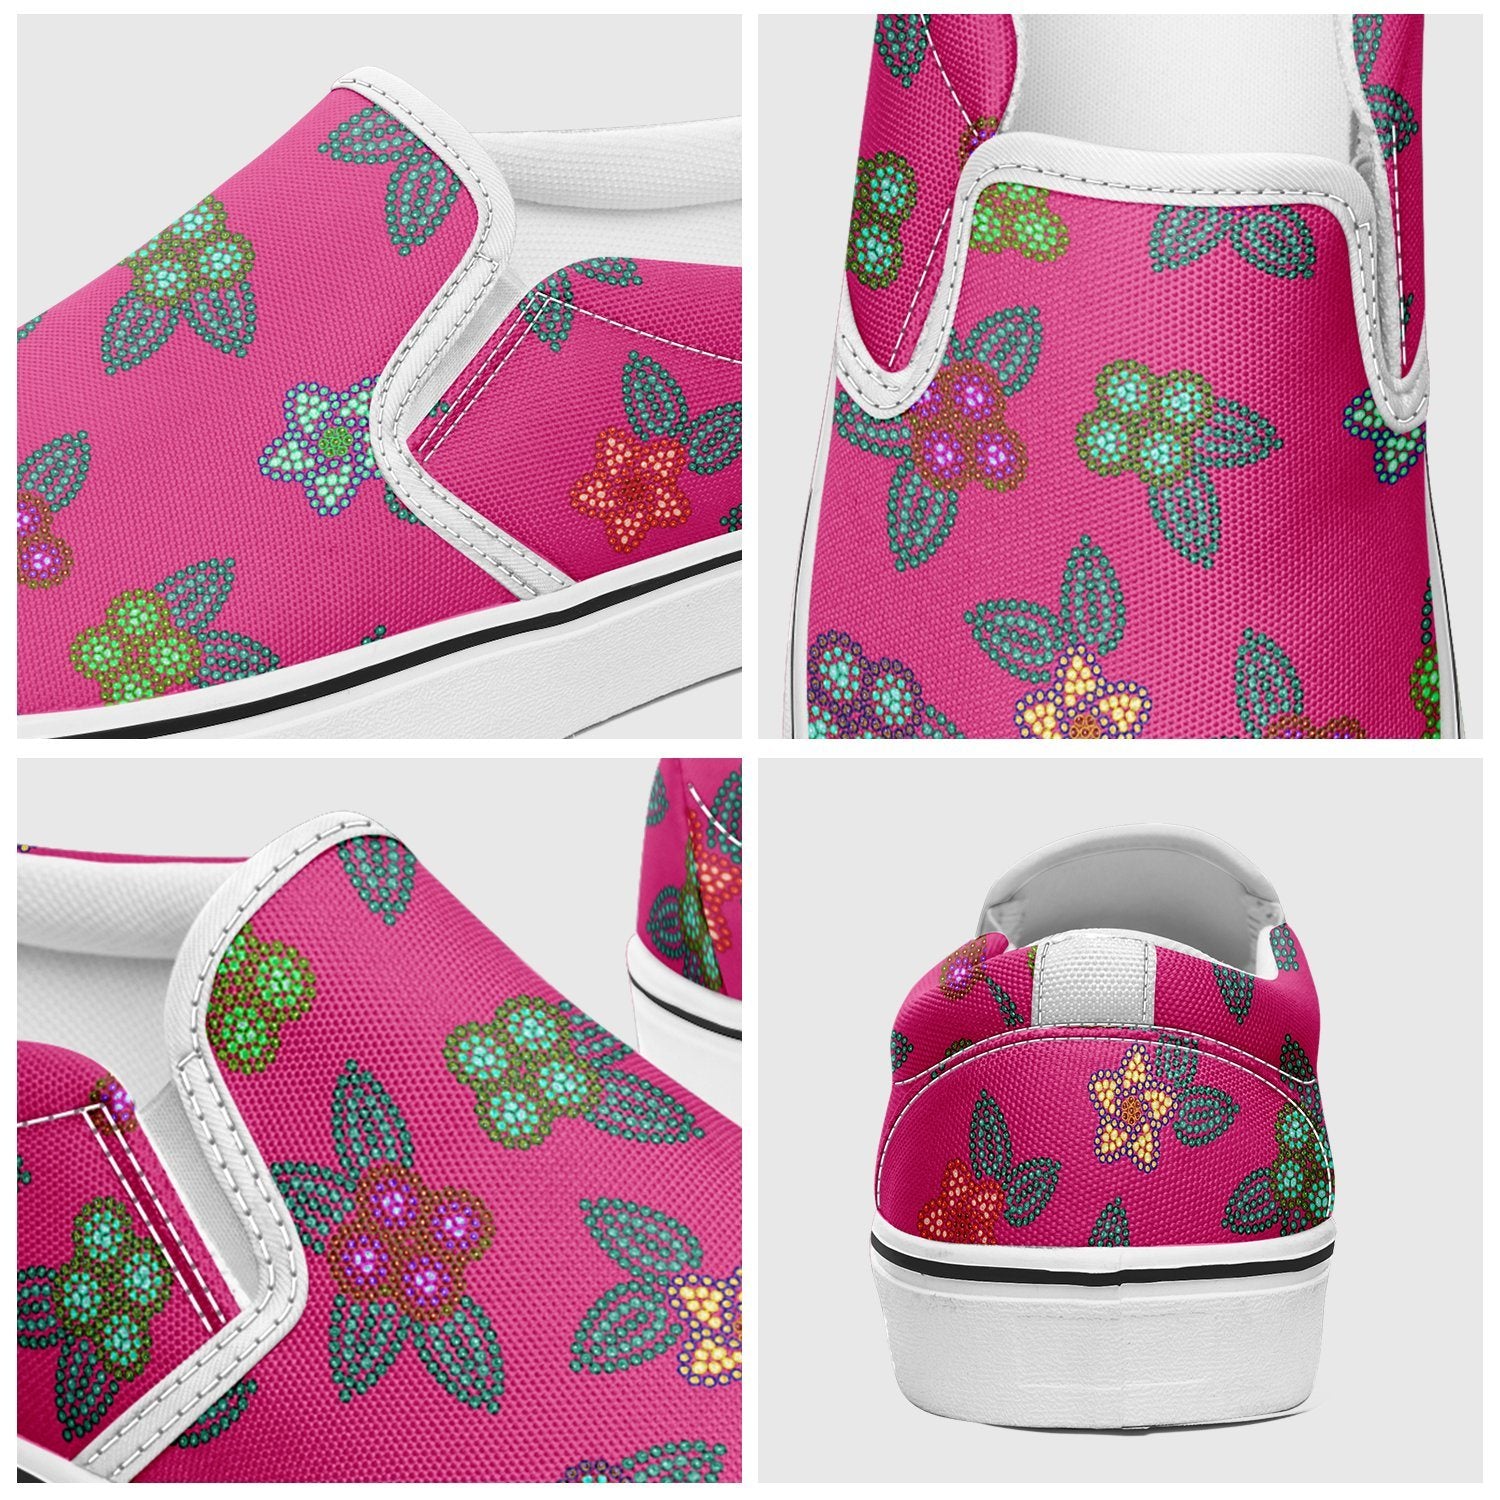 Berry Flowers Otoyimm Kid's Canvas Slip On Shoes otoyimm Herman 